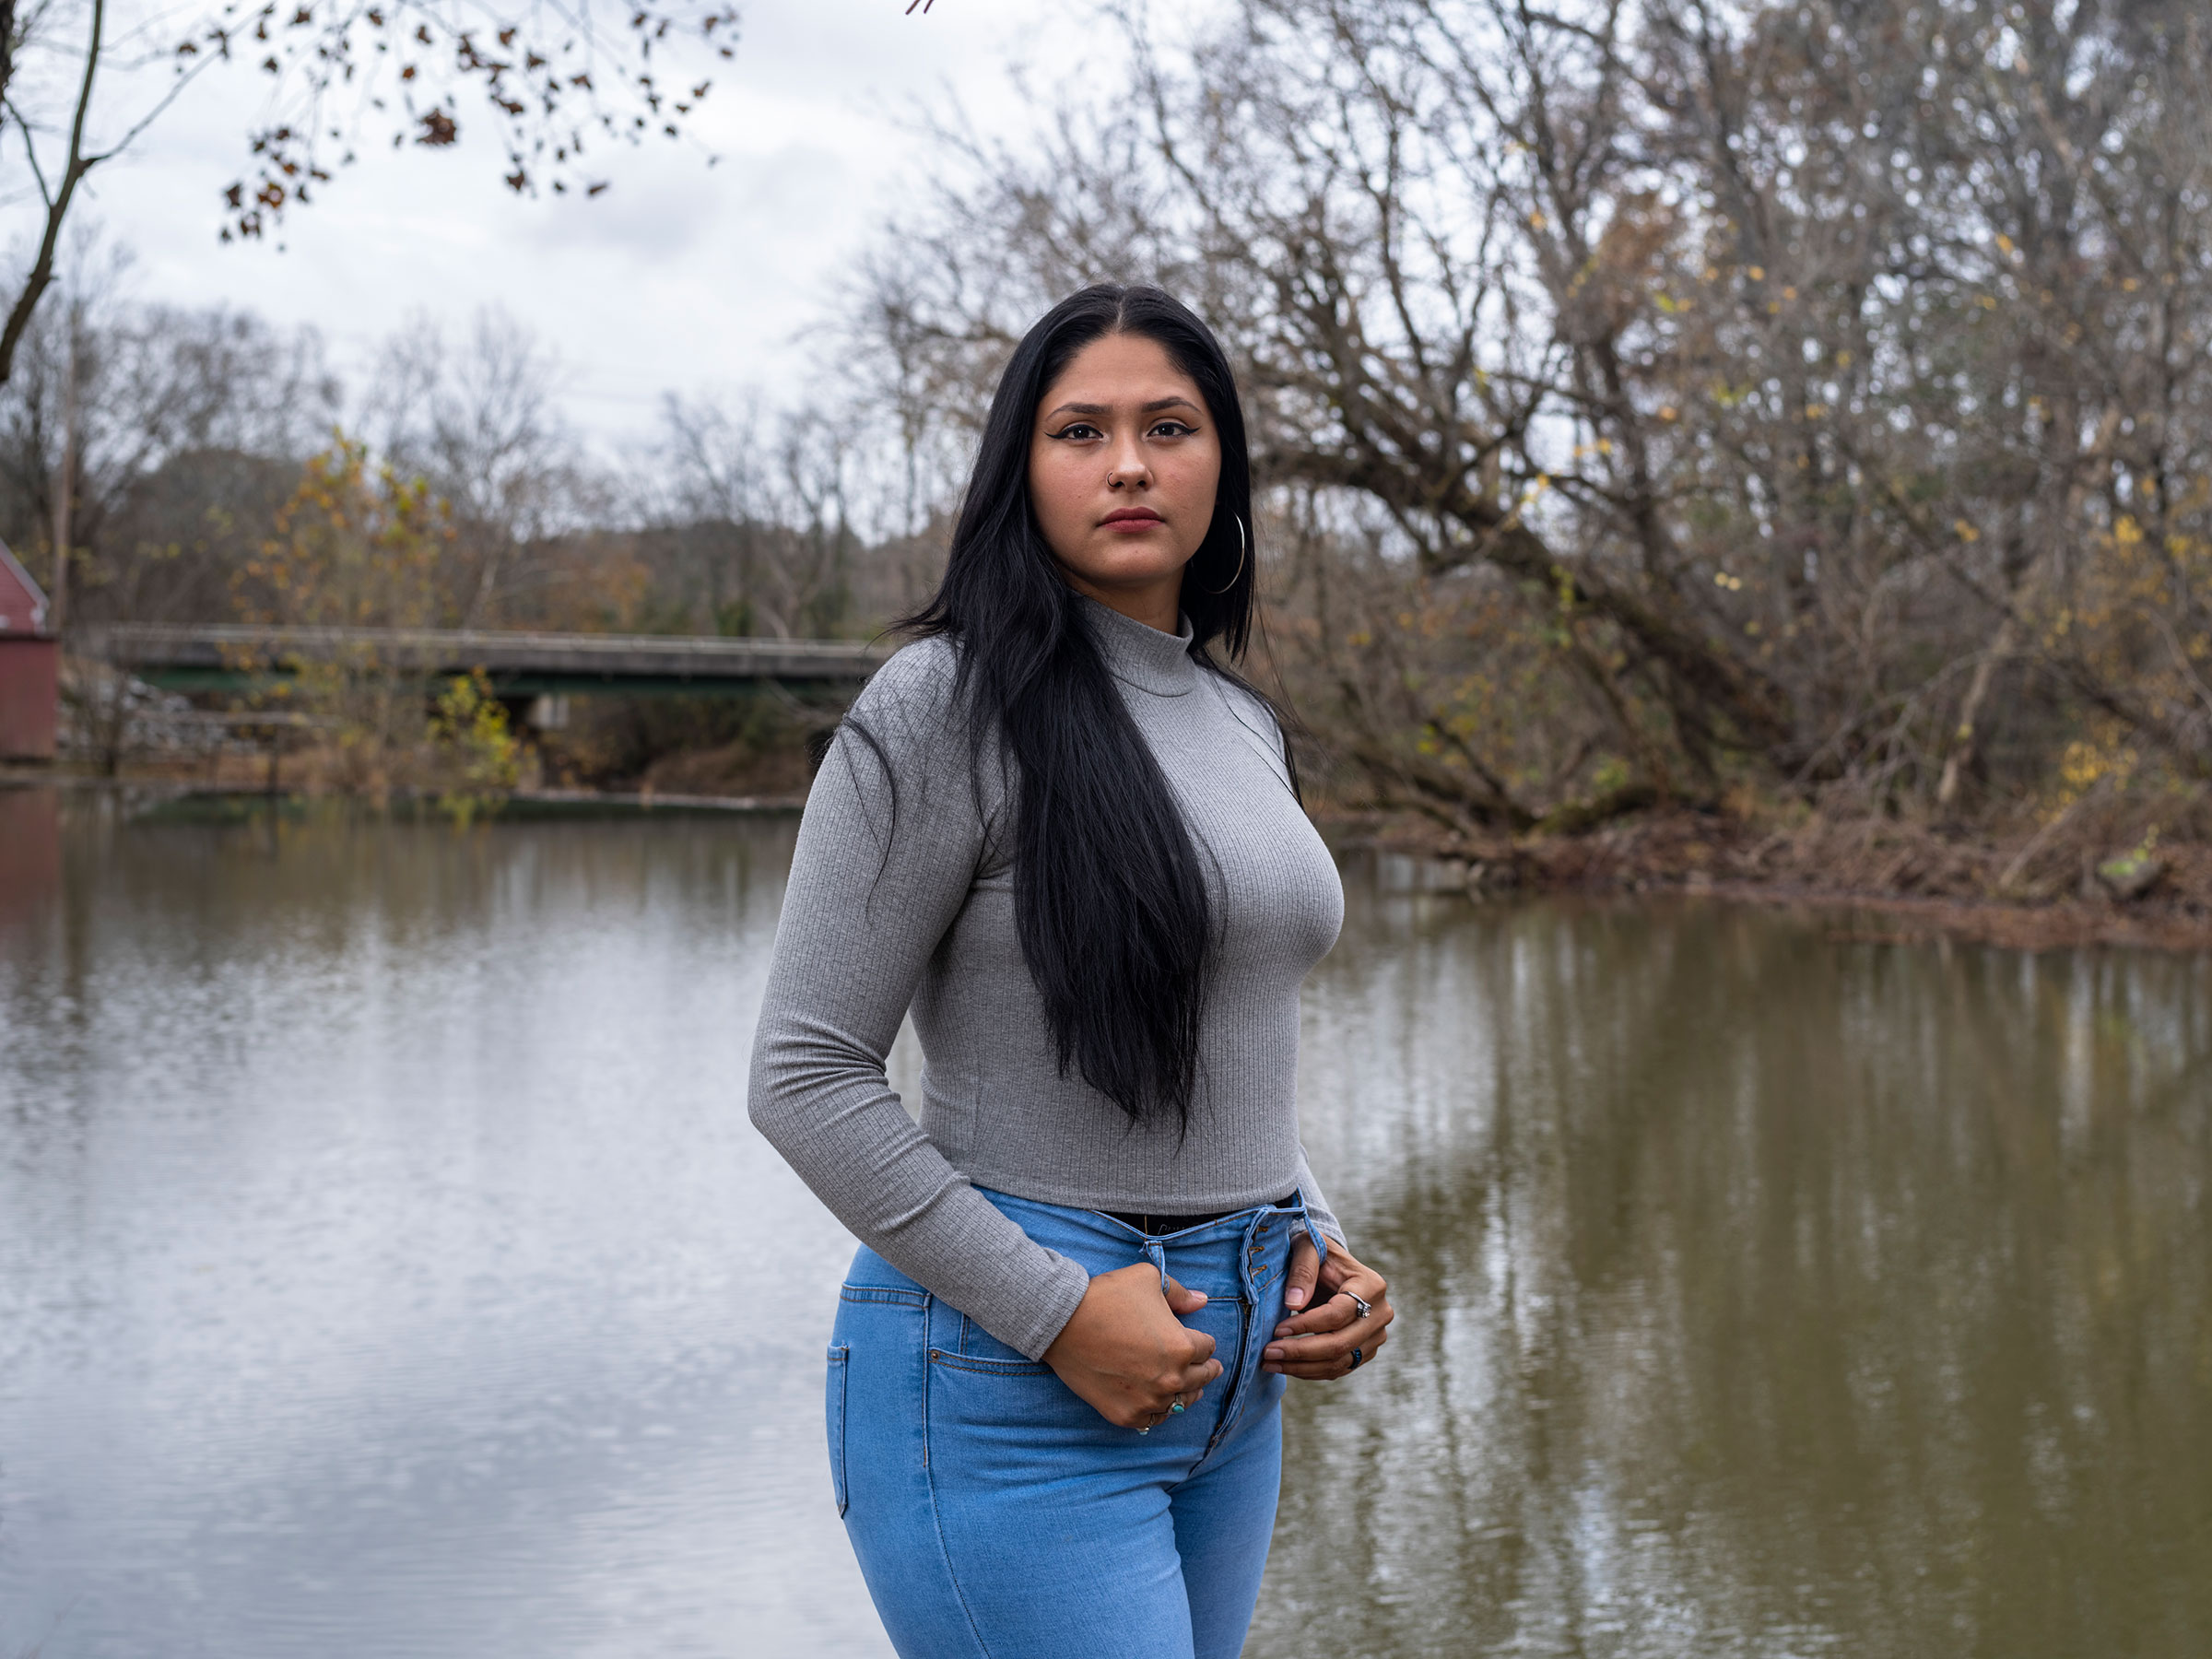 Lupita Cadena poses for a portrait near her home in Chatsworth, Ga. on Nov. 6. (Gillian Laub for TIME)